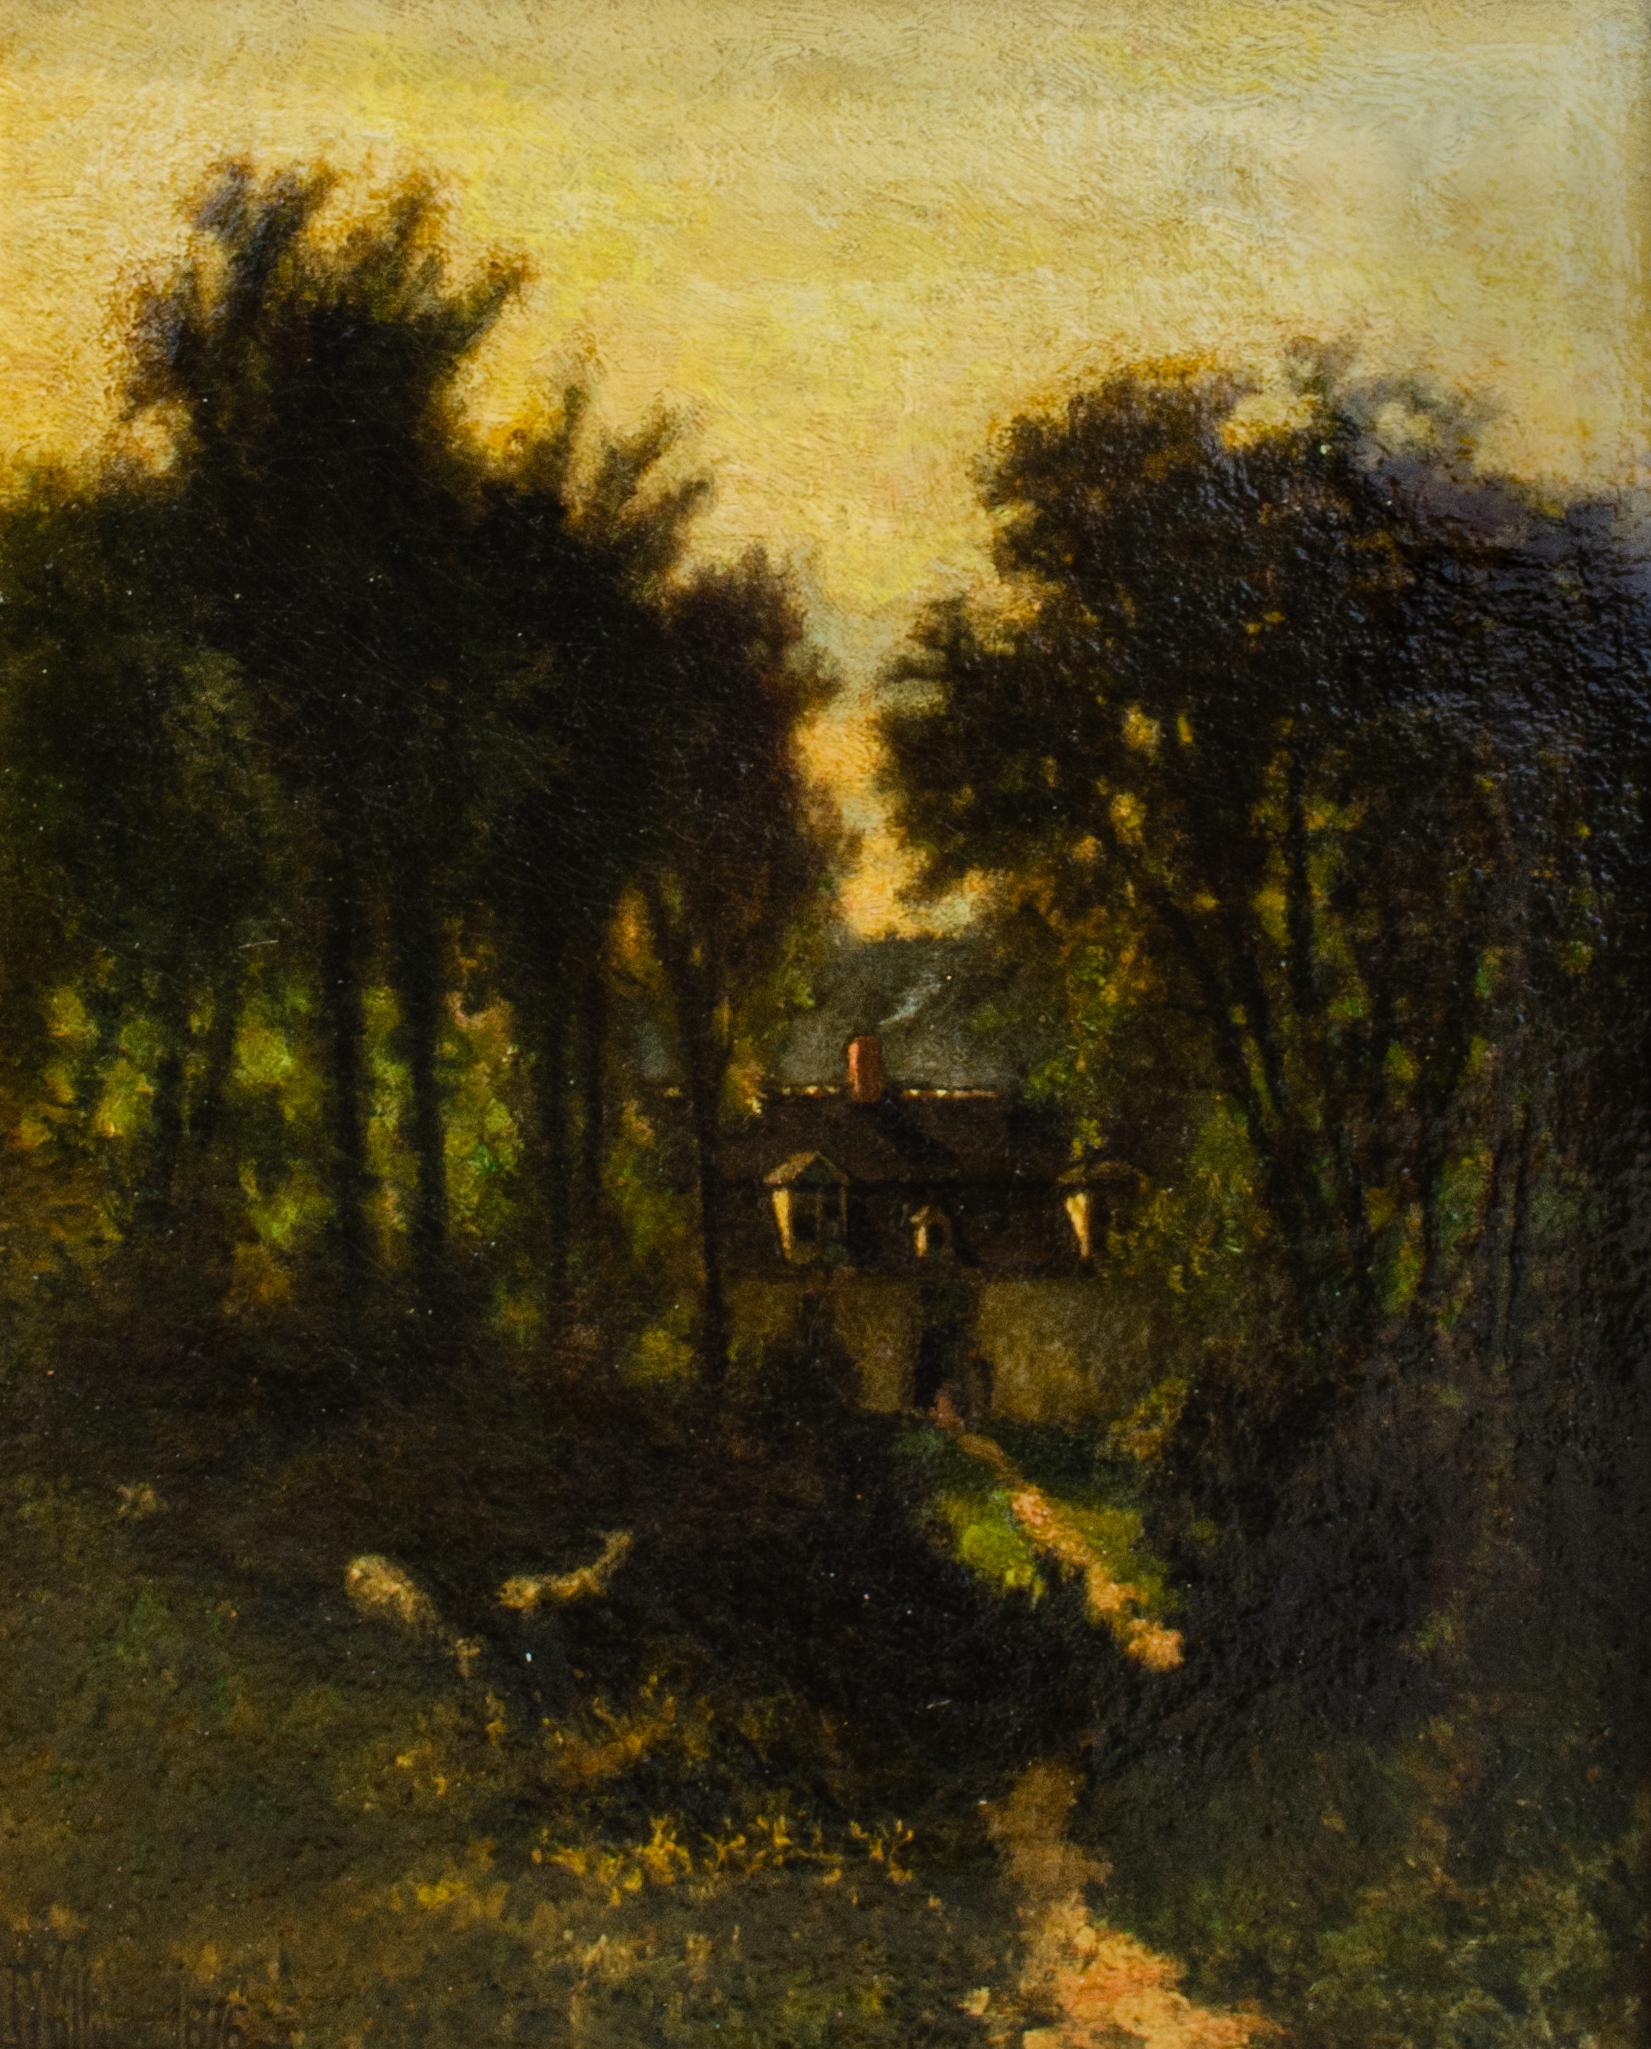 Countryside, 1876
Oil on canvas
13 1/2 x 11 in.
Framed: 17 1/2 x 15 x 1 1/2 in.
Signed lower left and dated 1876
